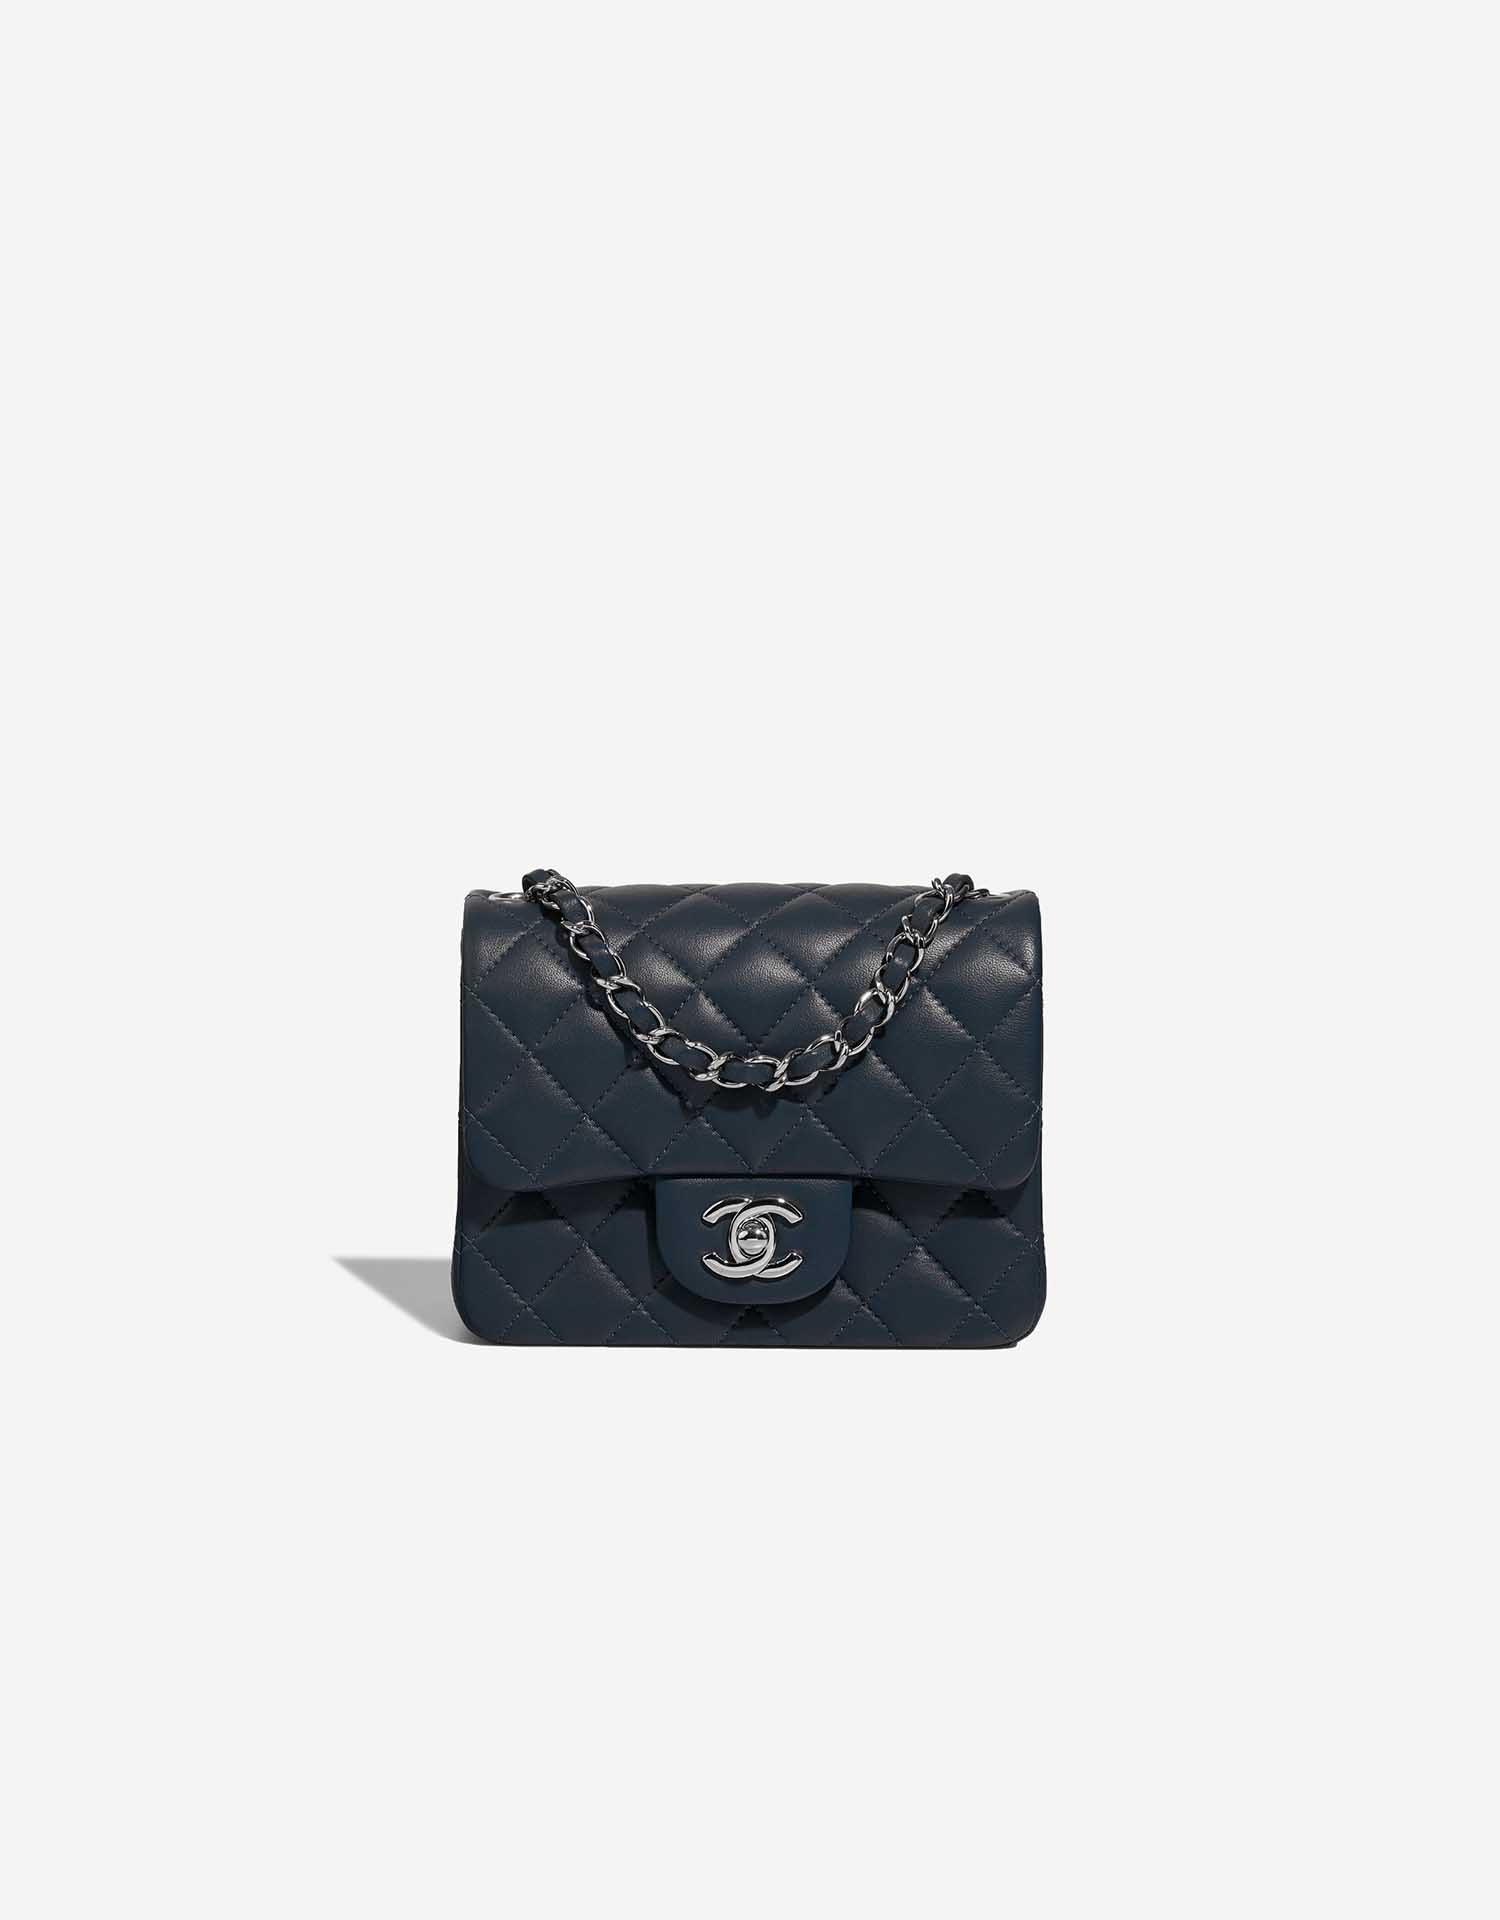 Chanel Mini Classic Flap Quilted Lambskin Bag in Two Tone Black